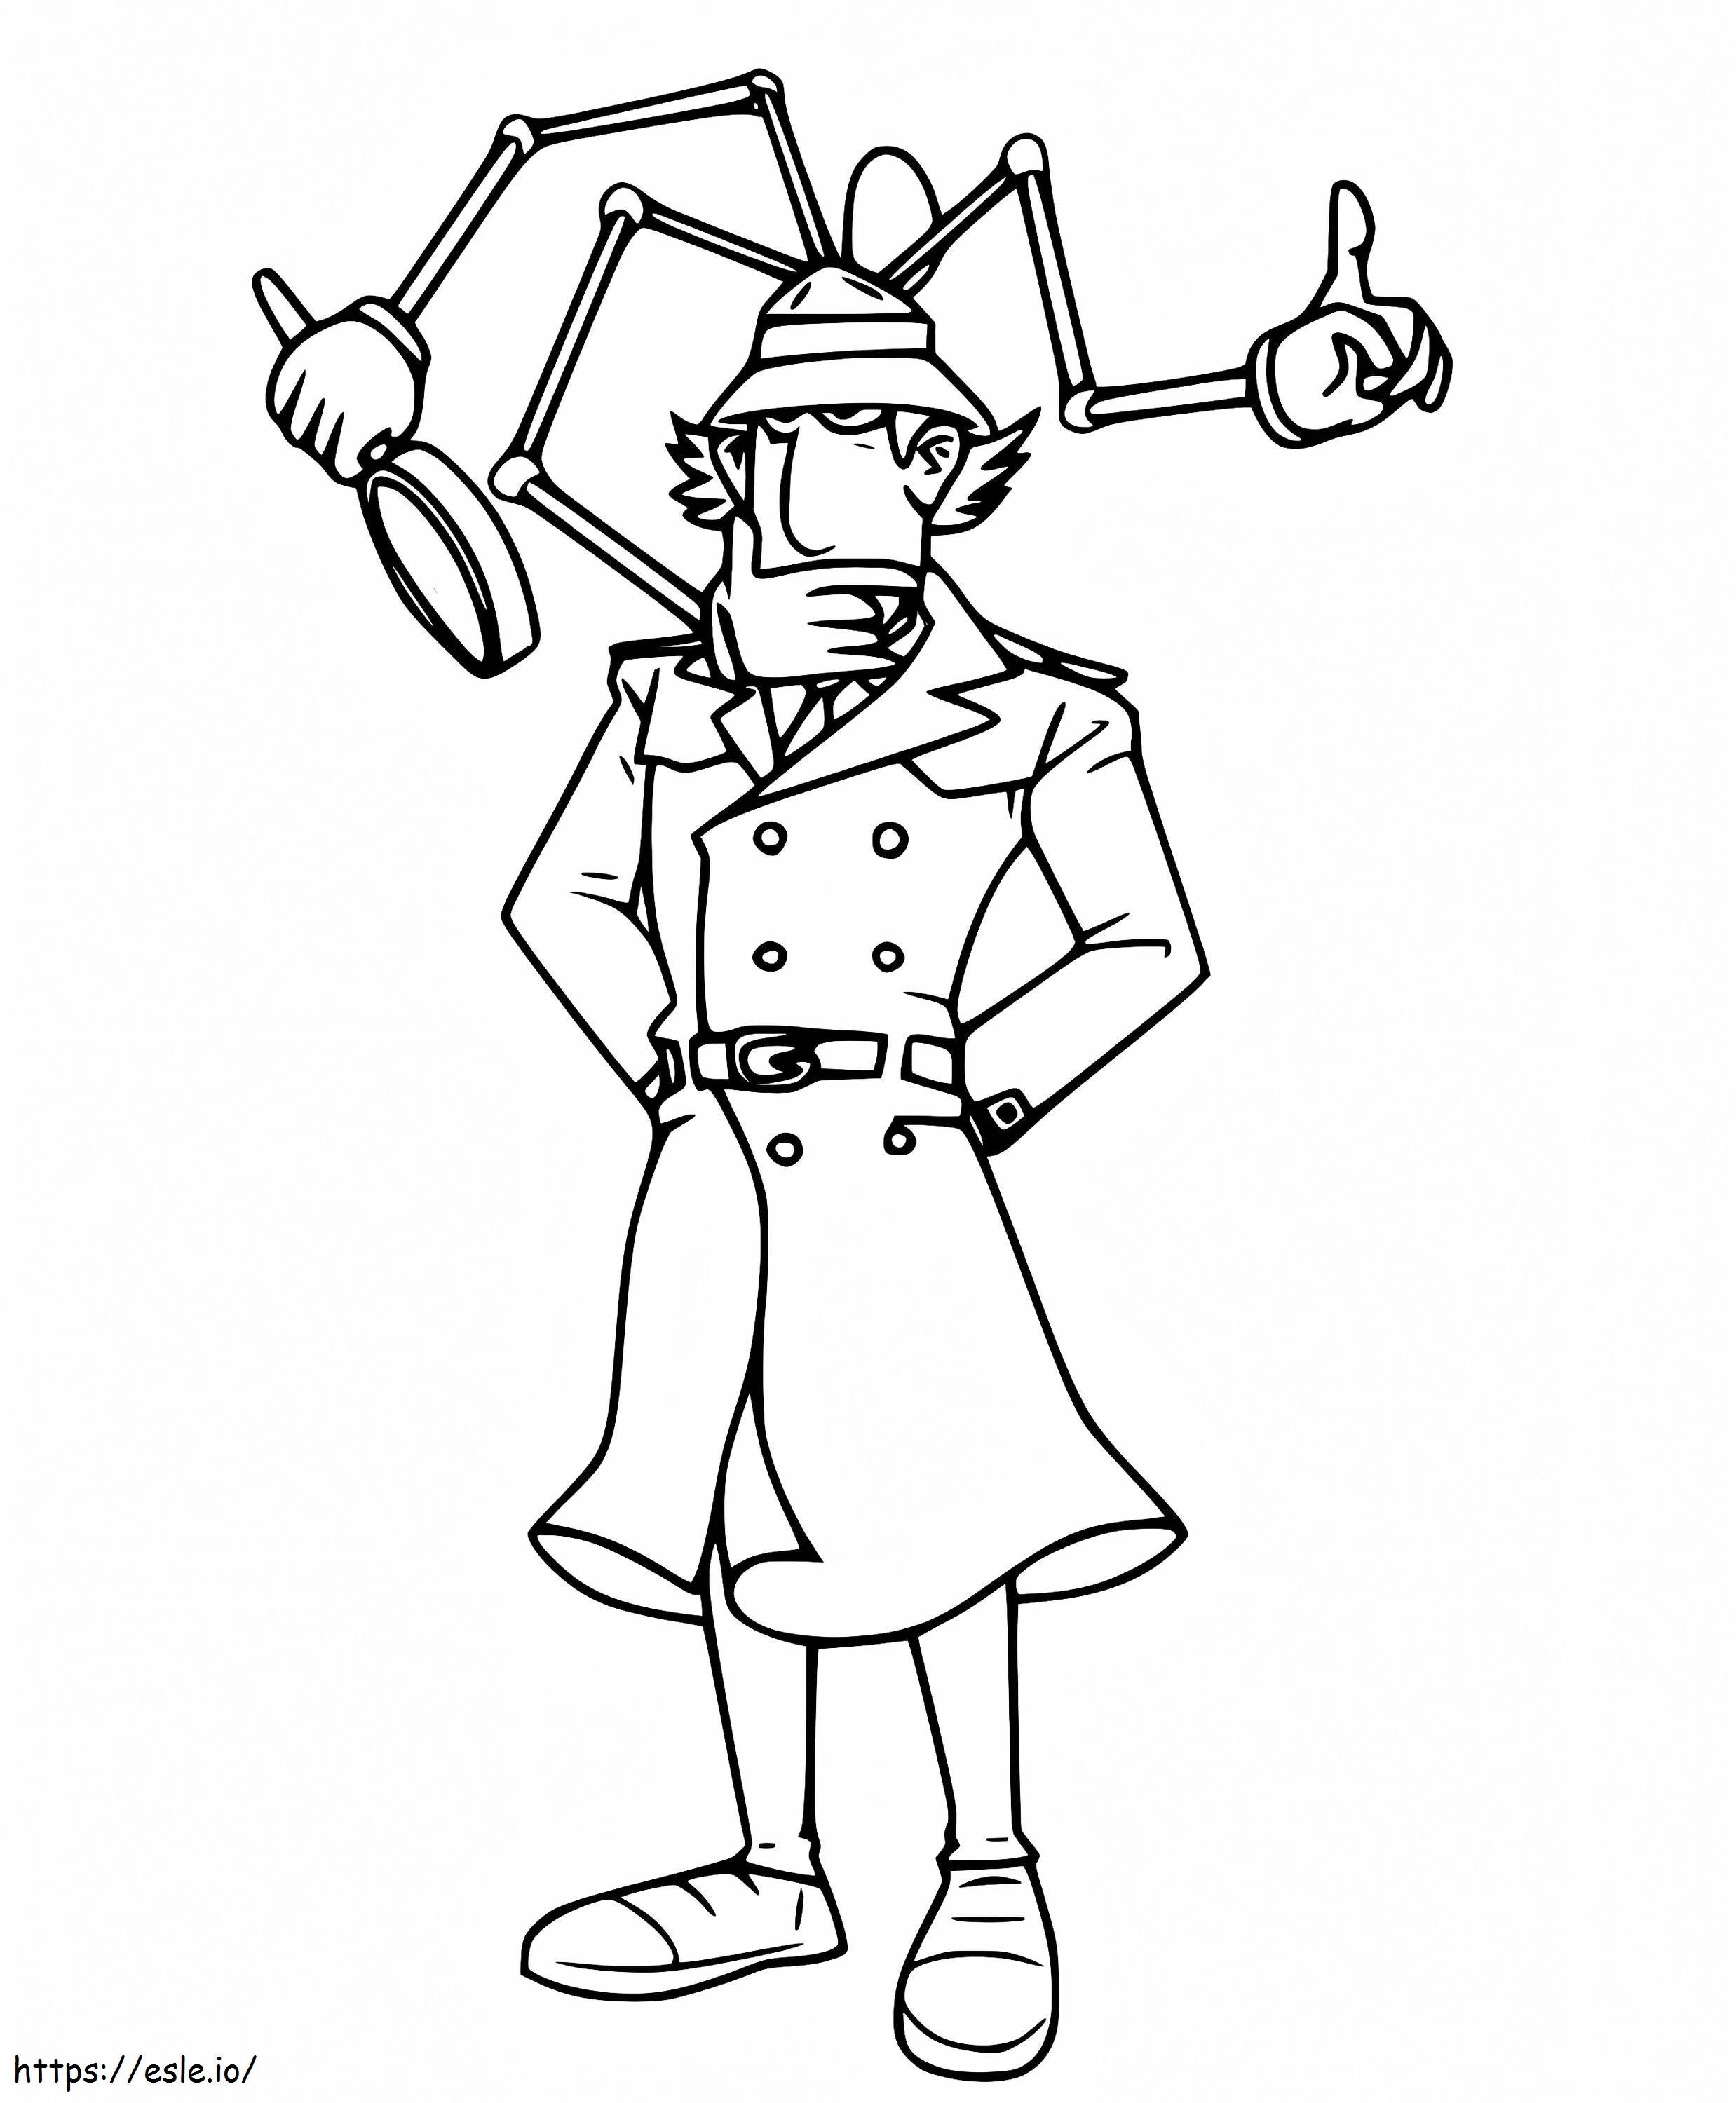 Inspector Gadget Thinking coloring page